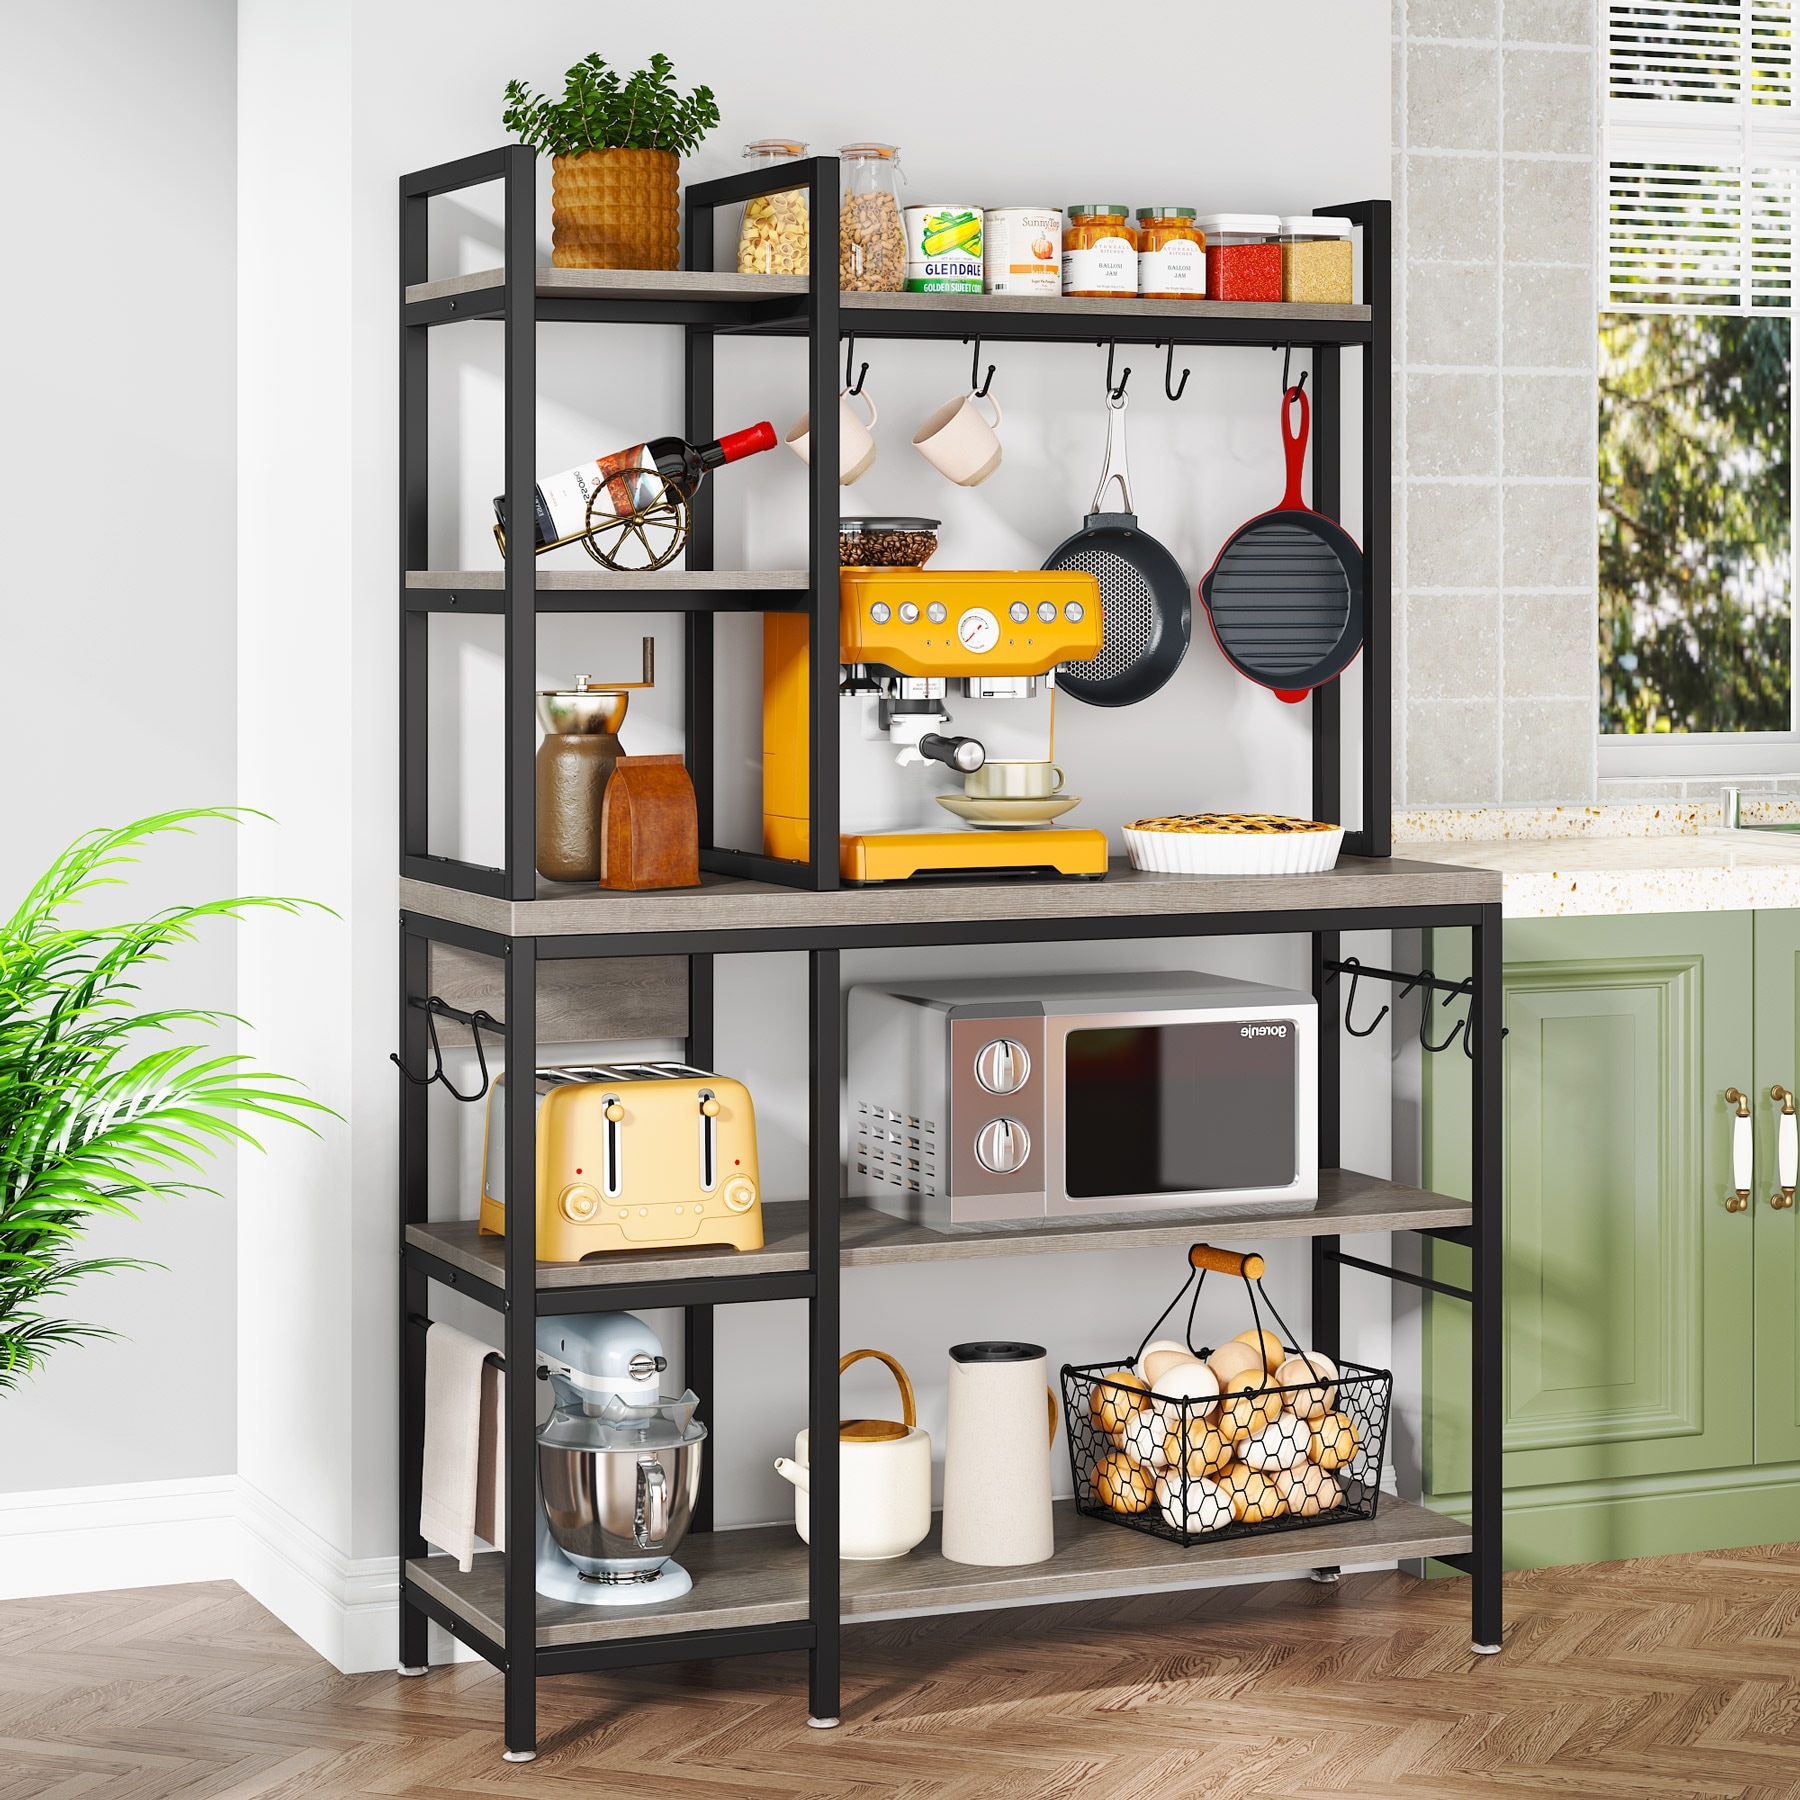 https://ak1.ostkcdn.com/images/products/is/images/direct/3e6ed9b051c46c9ac22f2588a2e74132447047e3/Kitchen-Bakers-Rack-with-Storage%2C-43-inch-Microwave-Stand-5-Tier-Kitchen-Utility-Storage-Shelf.jpg